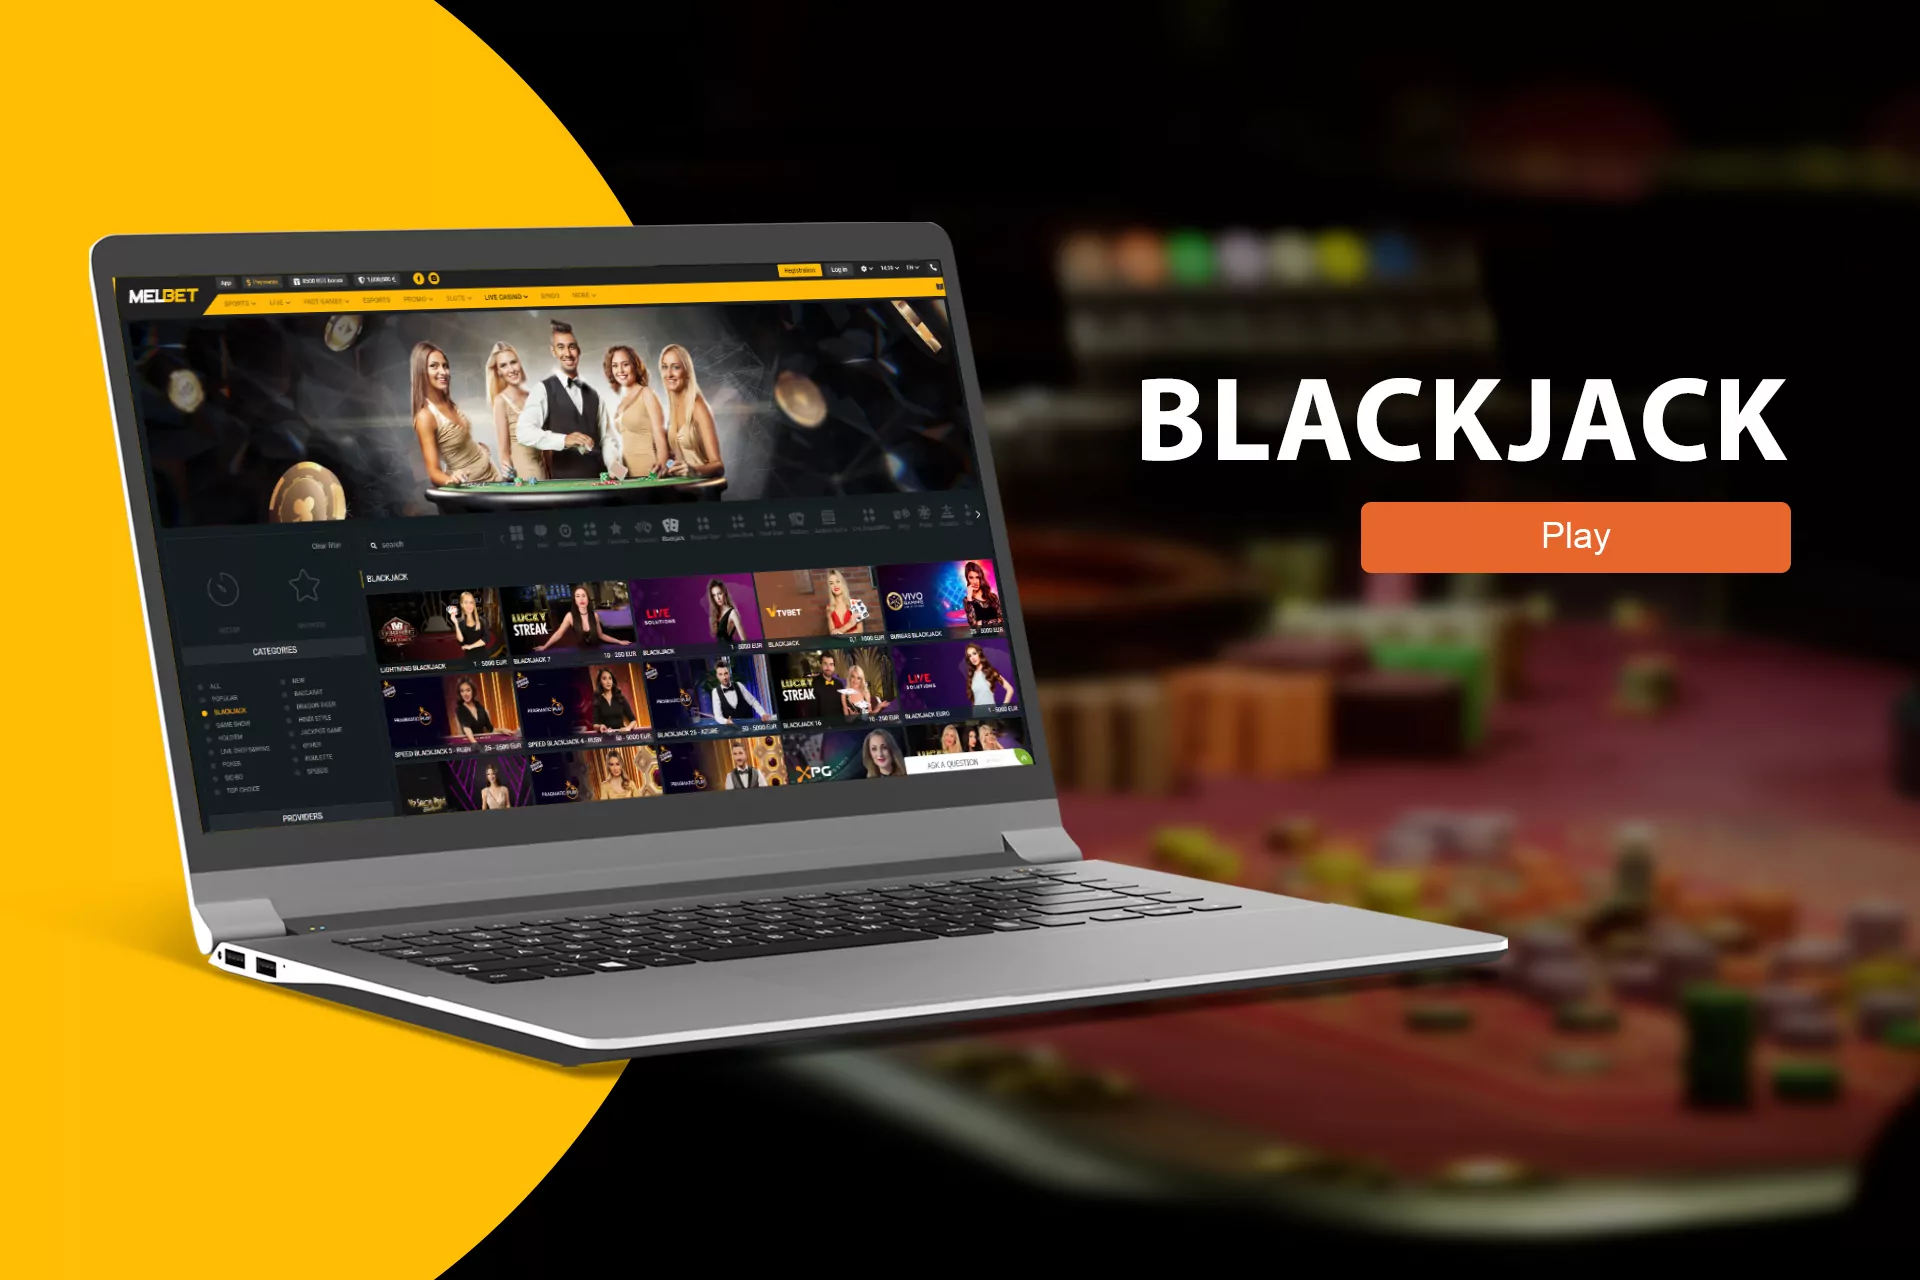 If you want to play blackjack online, just visit the Melbet Casino.